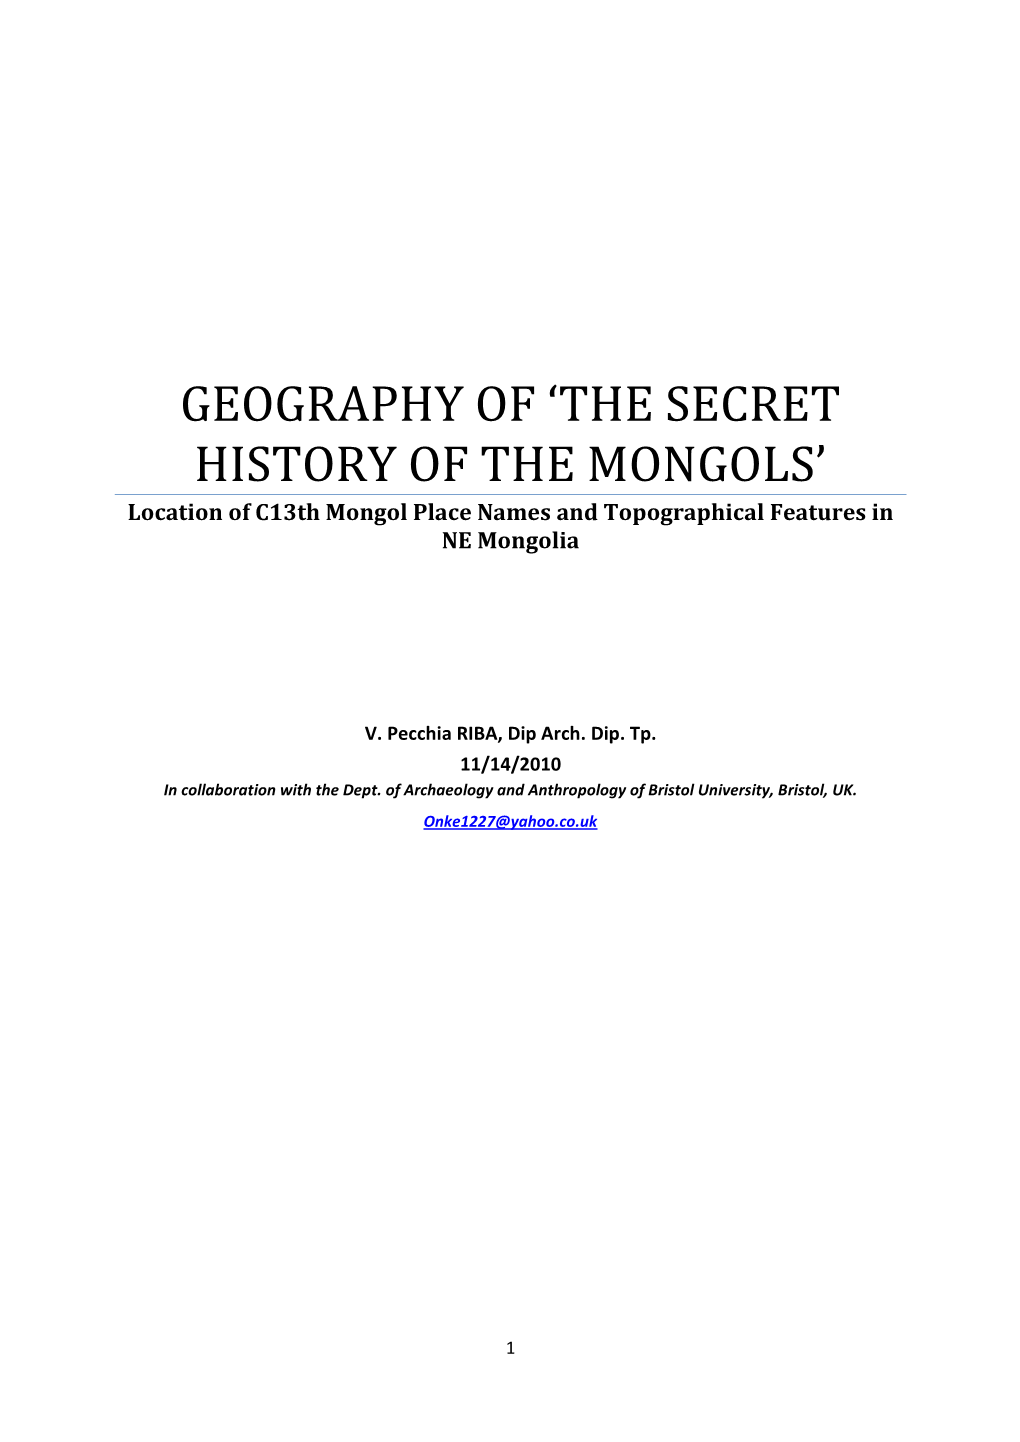 Geography of 'The Secret History of the Mongols'